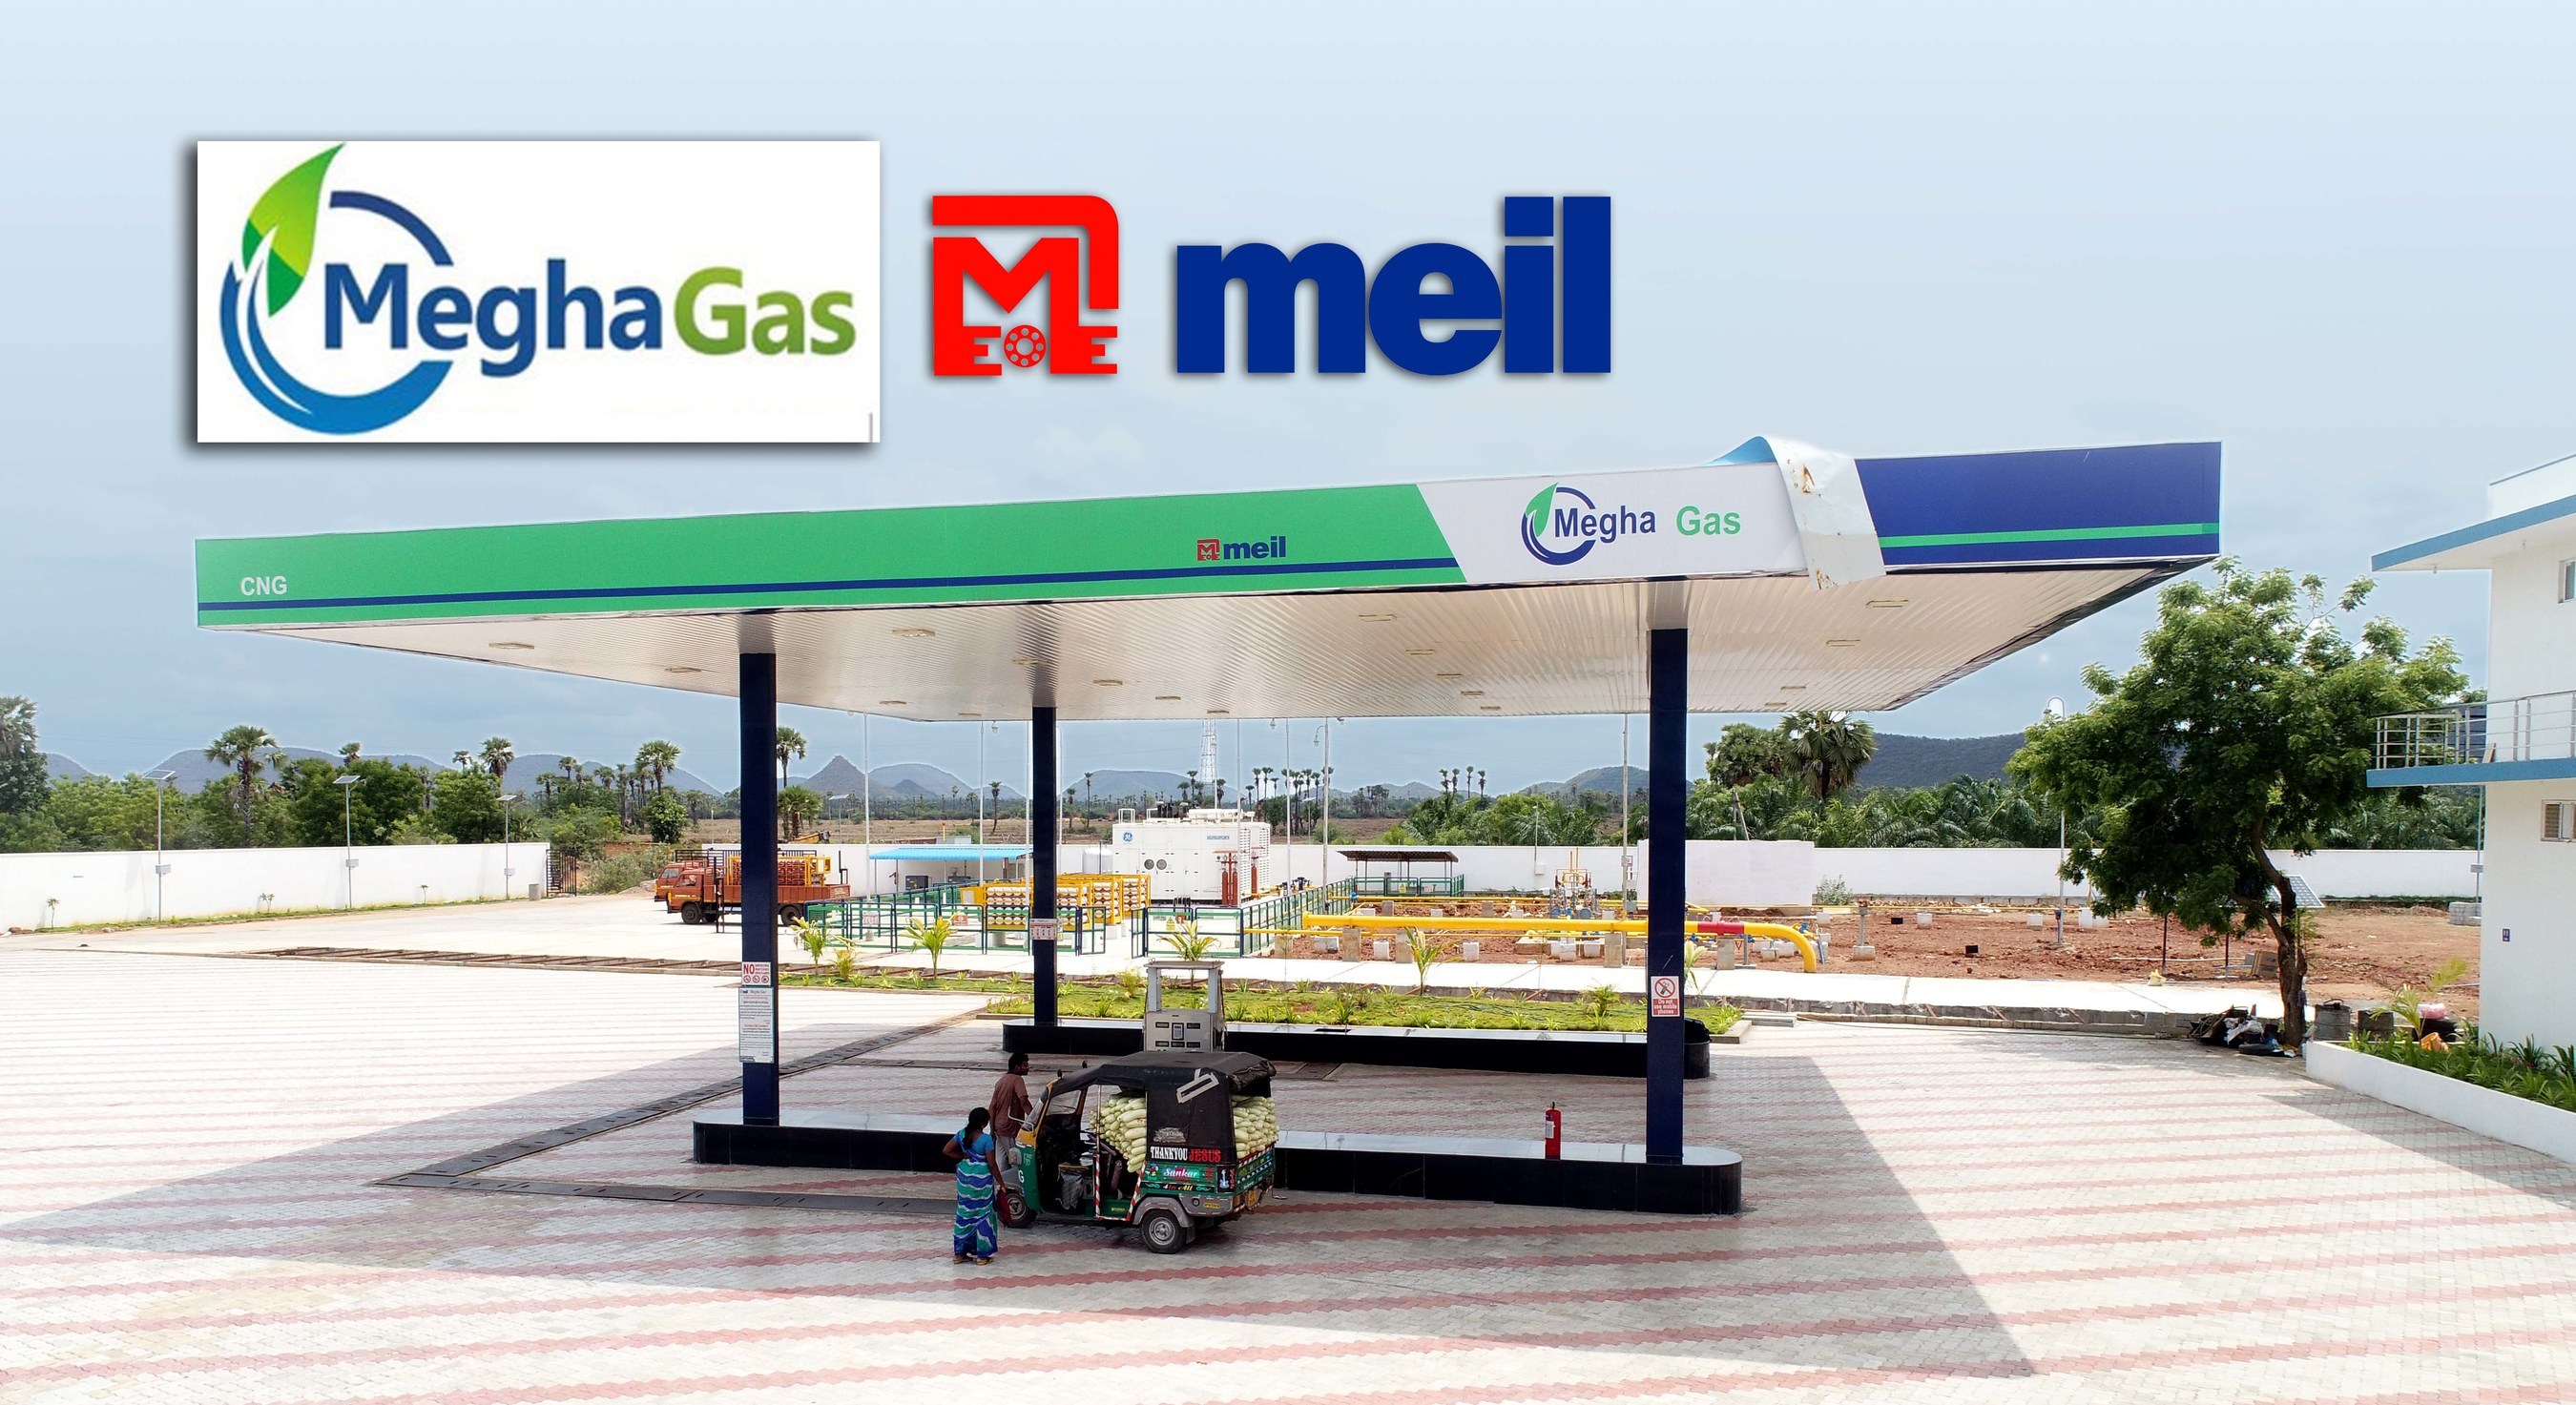 Megha Gas An Extraordinary Beginning Building Gas Infrastructure Aggressively For A Green Future